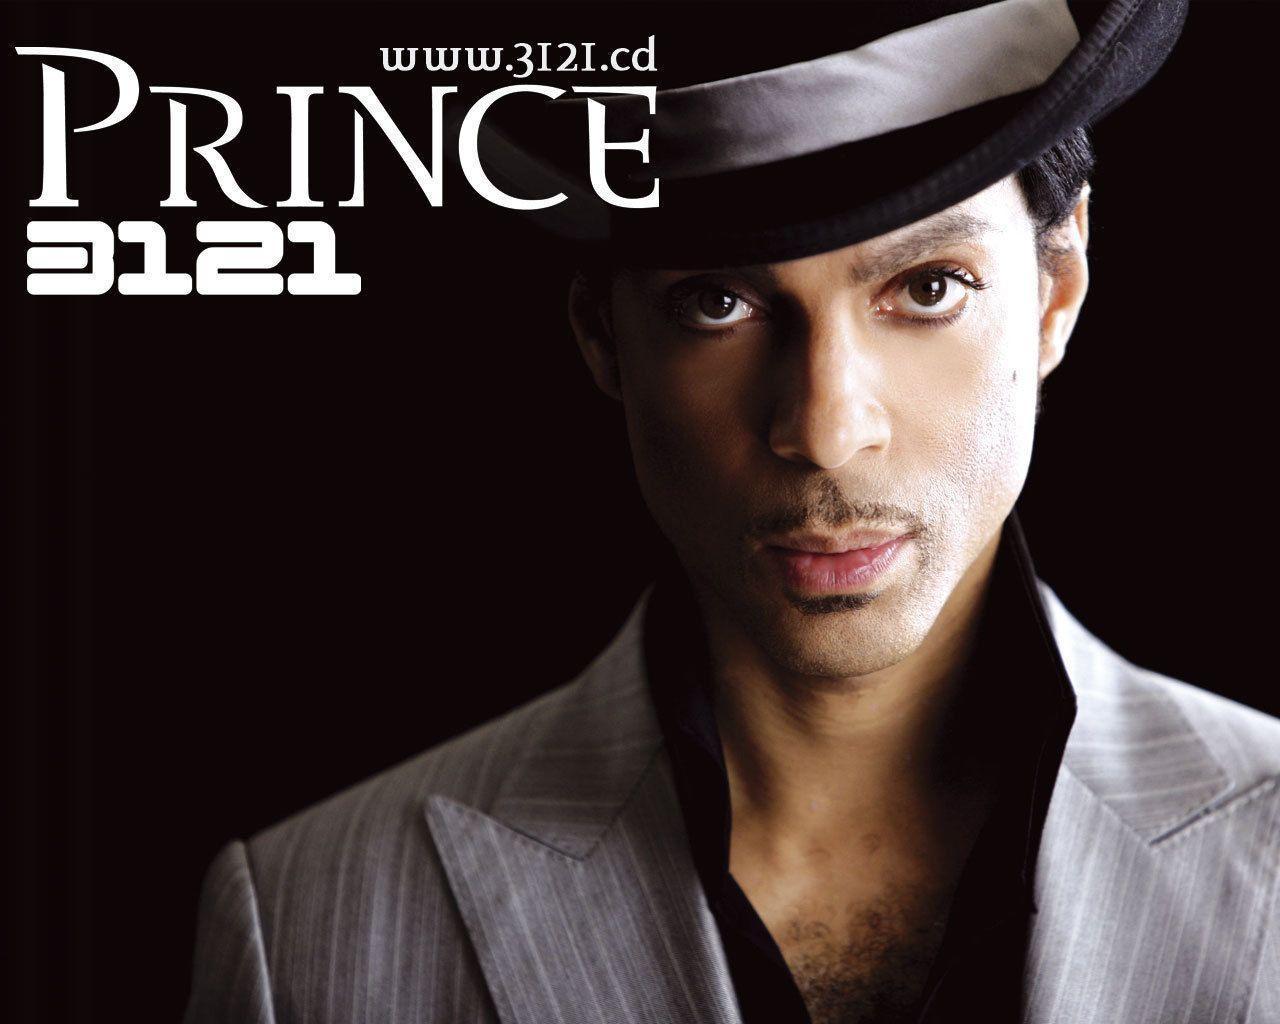 Gallery For: Prince Wallpaper, Prince Wallpaper, HQ